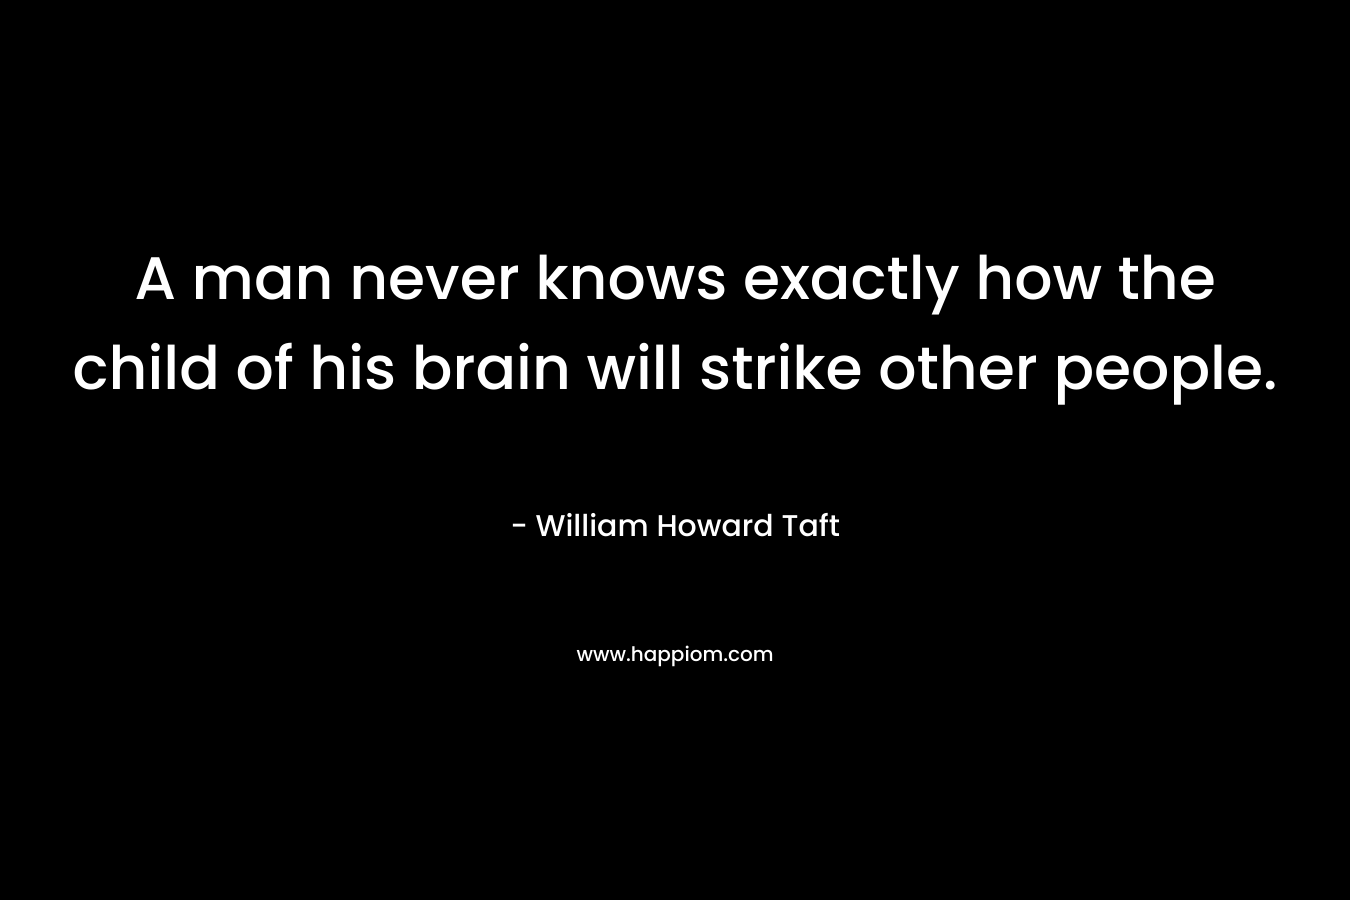 A man never knows exactly how the child of his brain will strike other people.